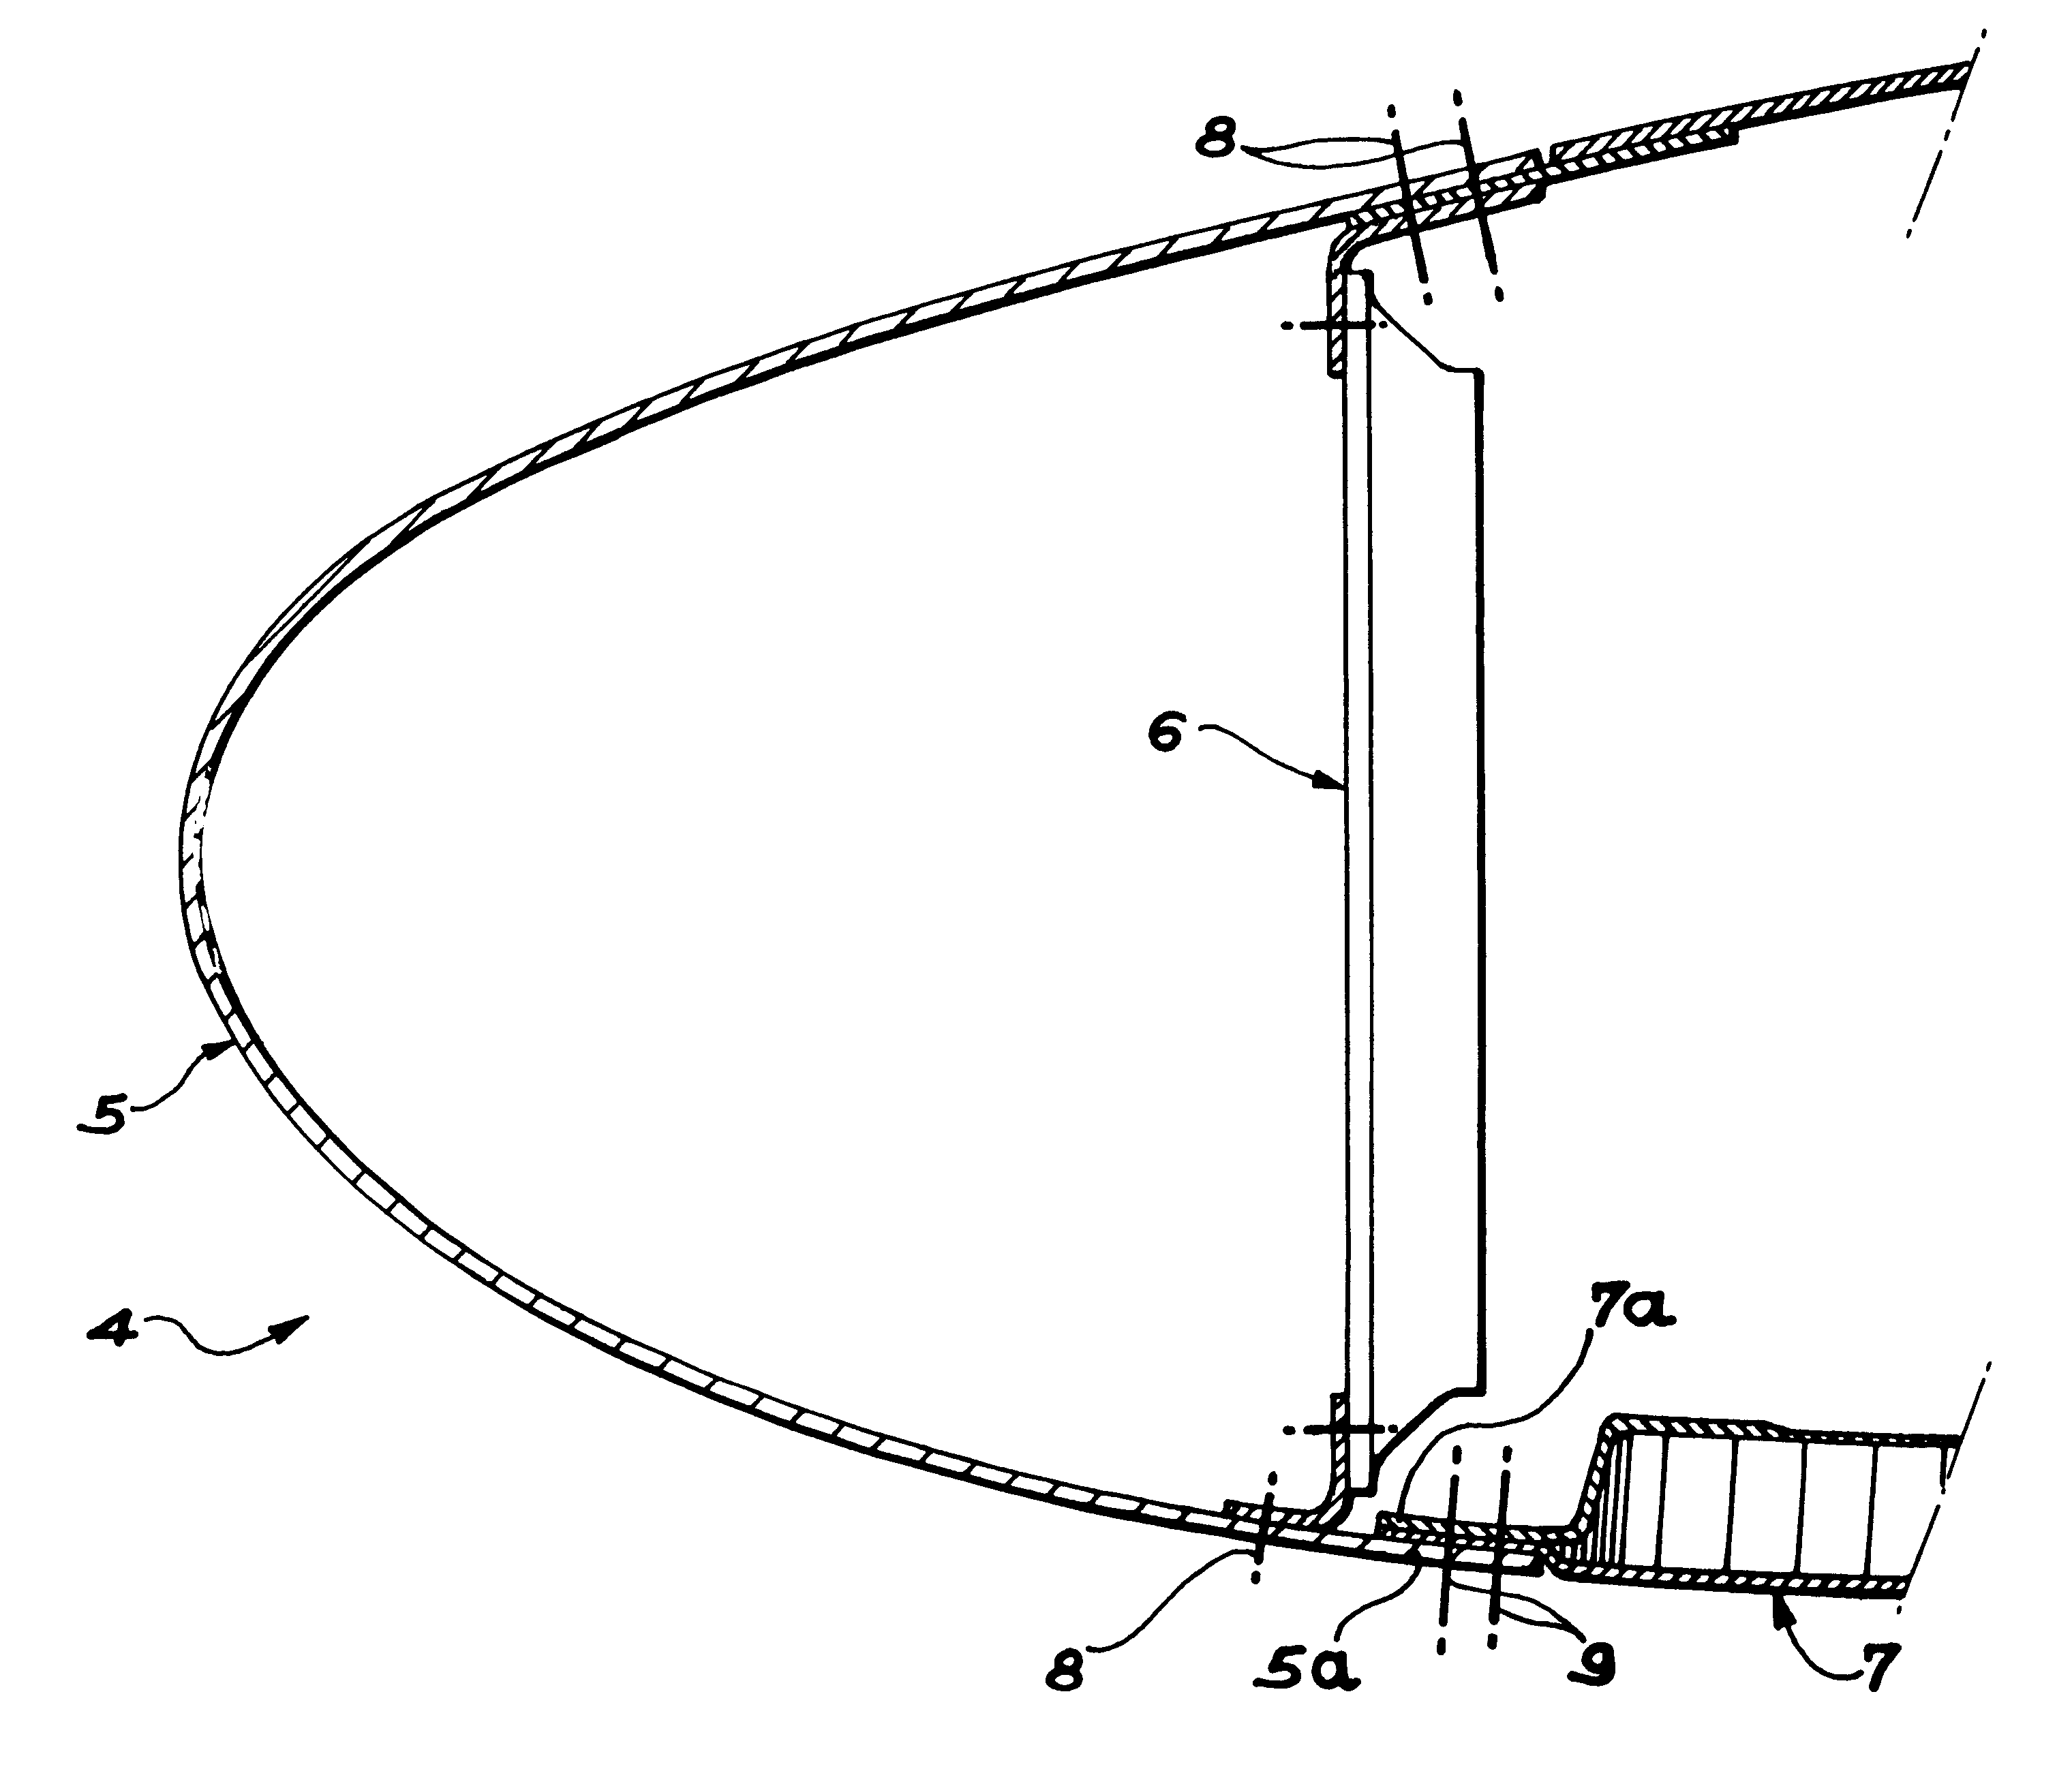 Air intake structure for aircraft engine